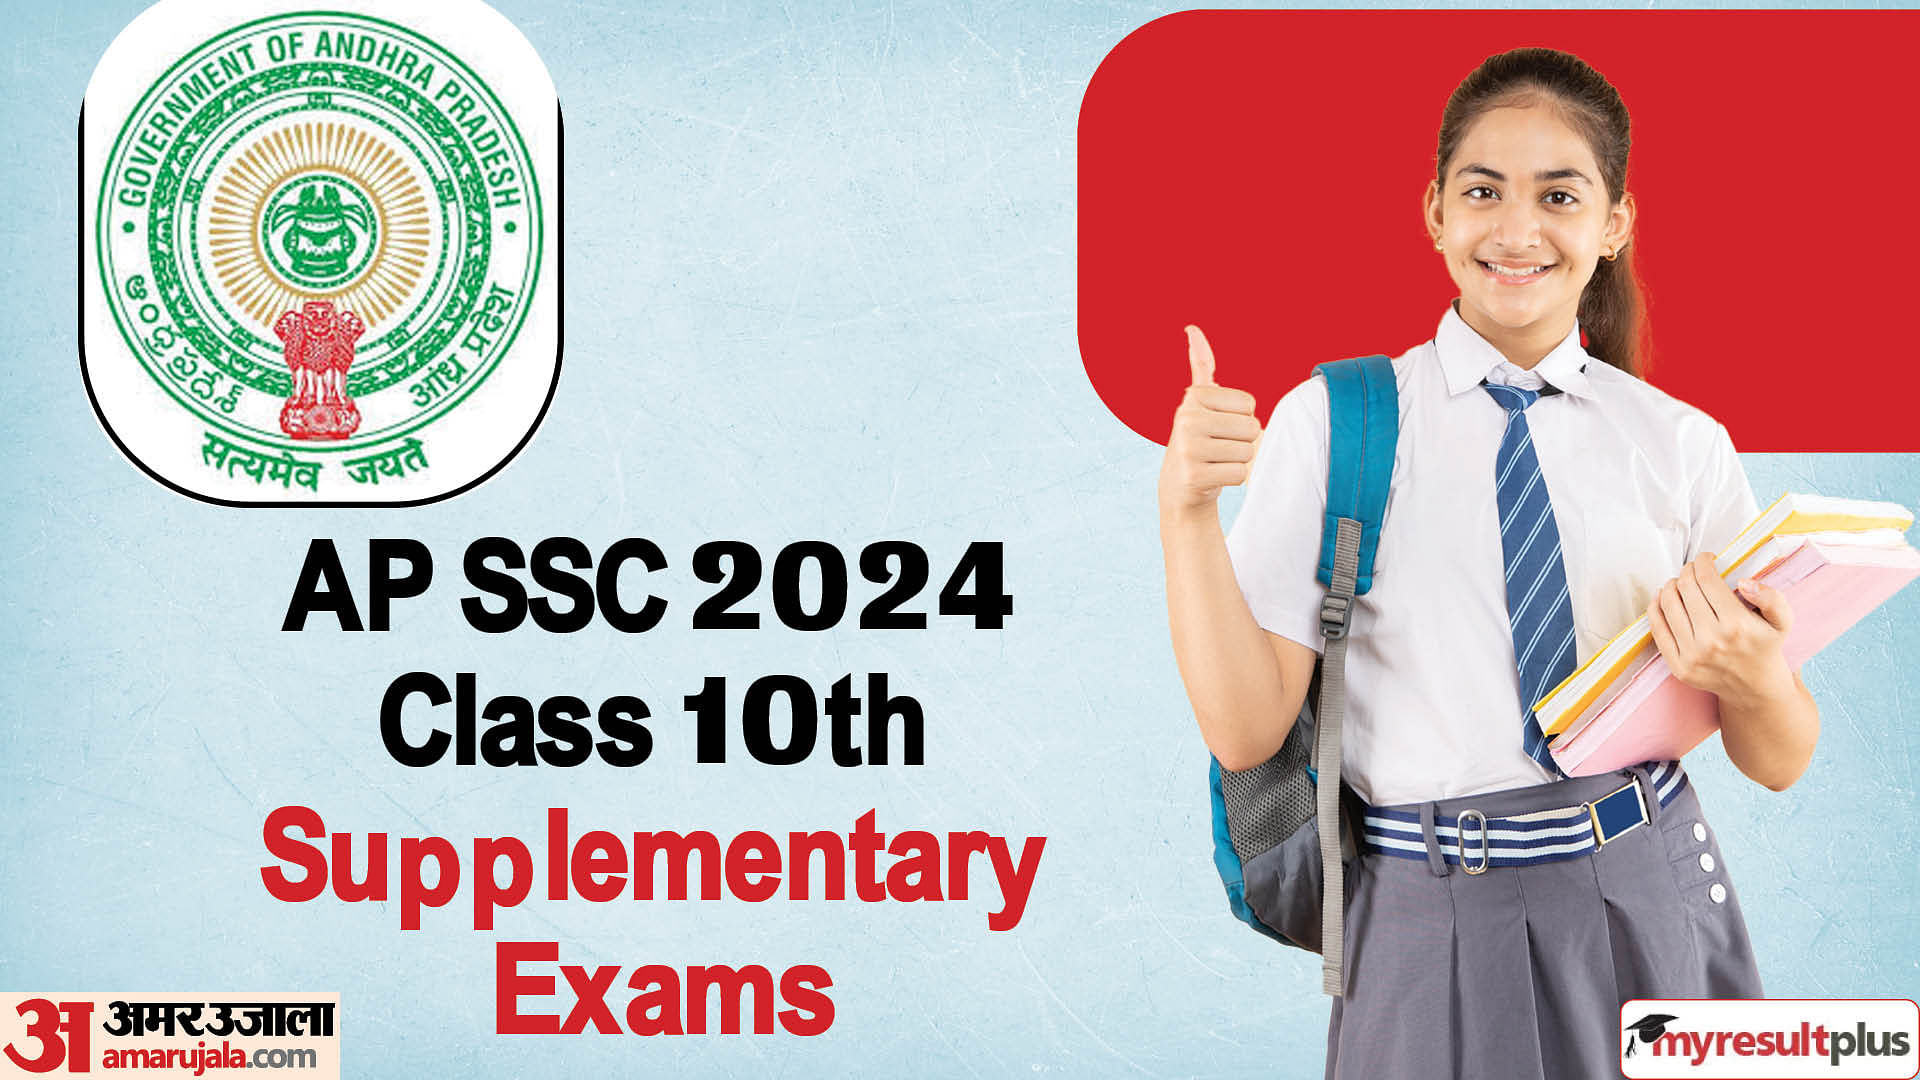 AP SSC 2024 Supplementary Exam Admit card out now, Read about the details mentioned on the scorecard here